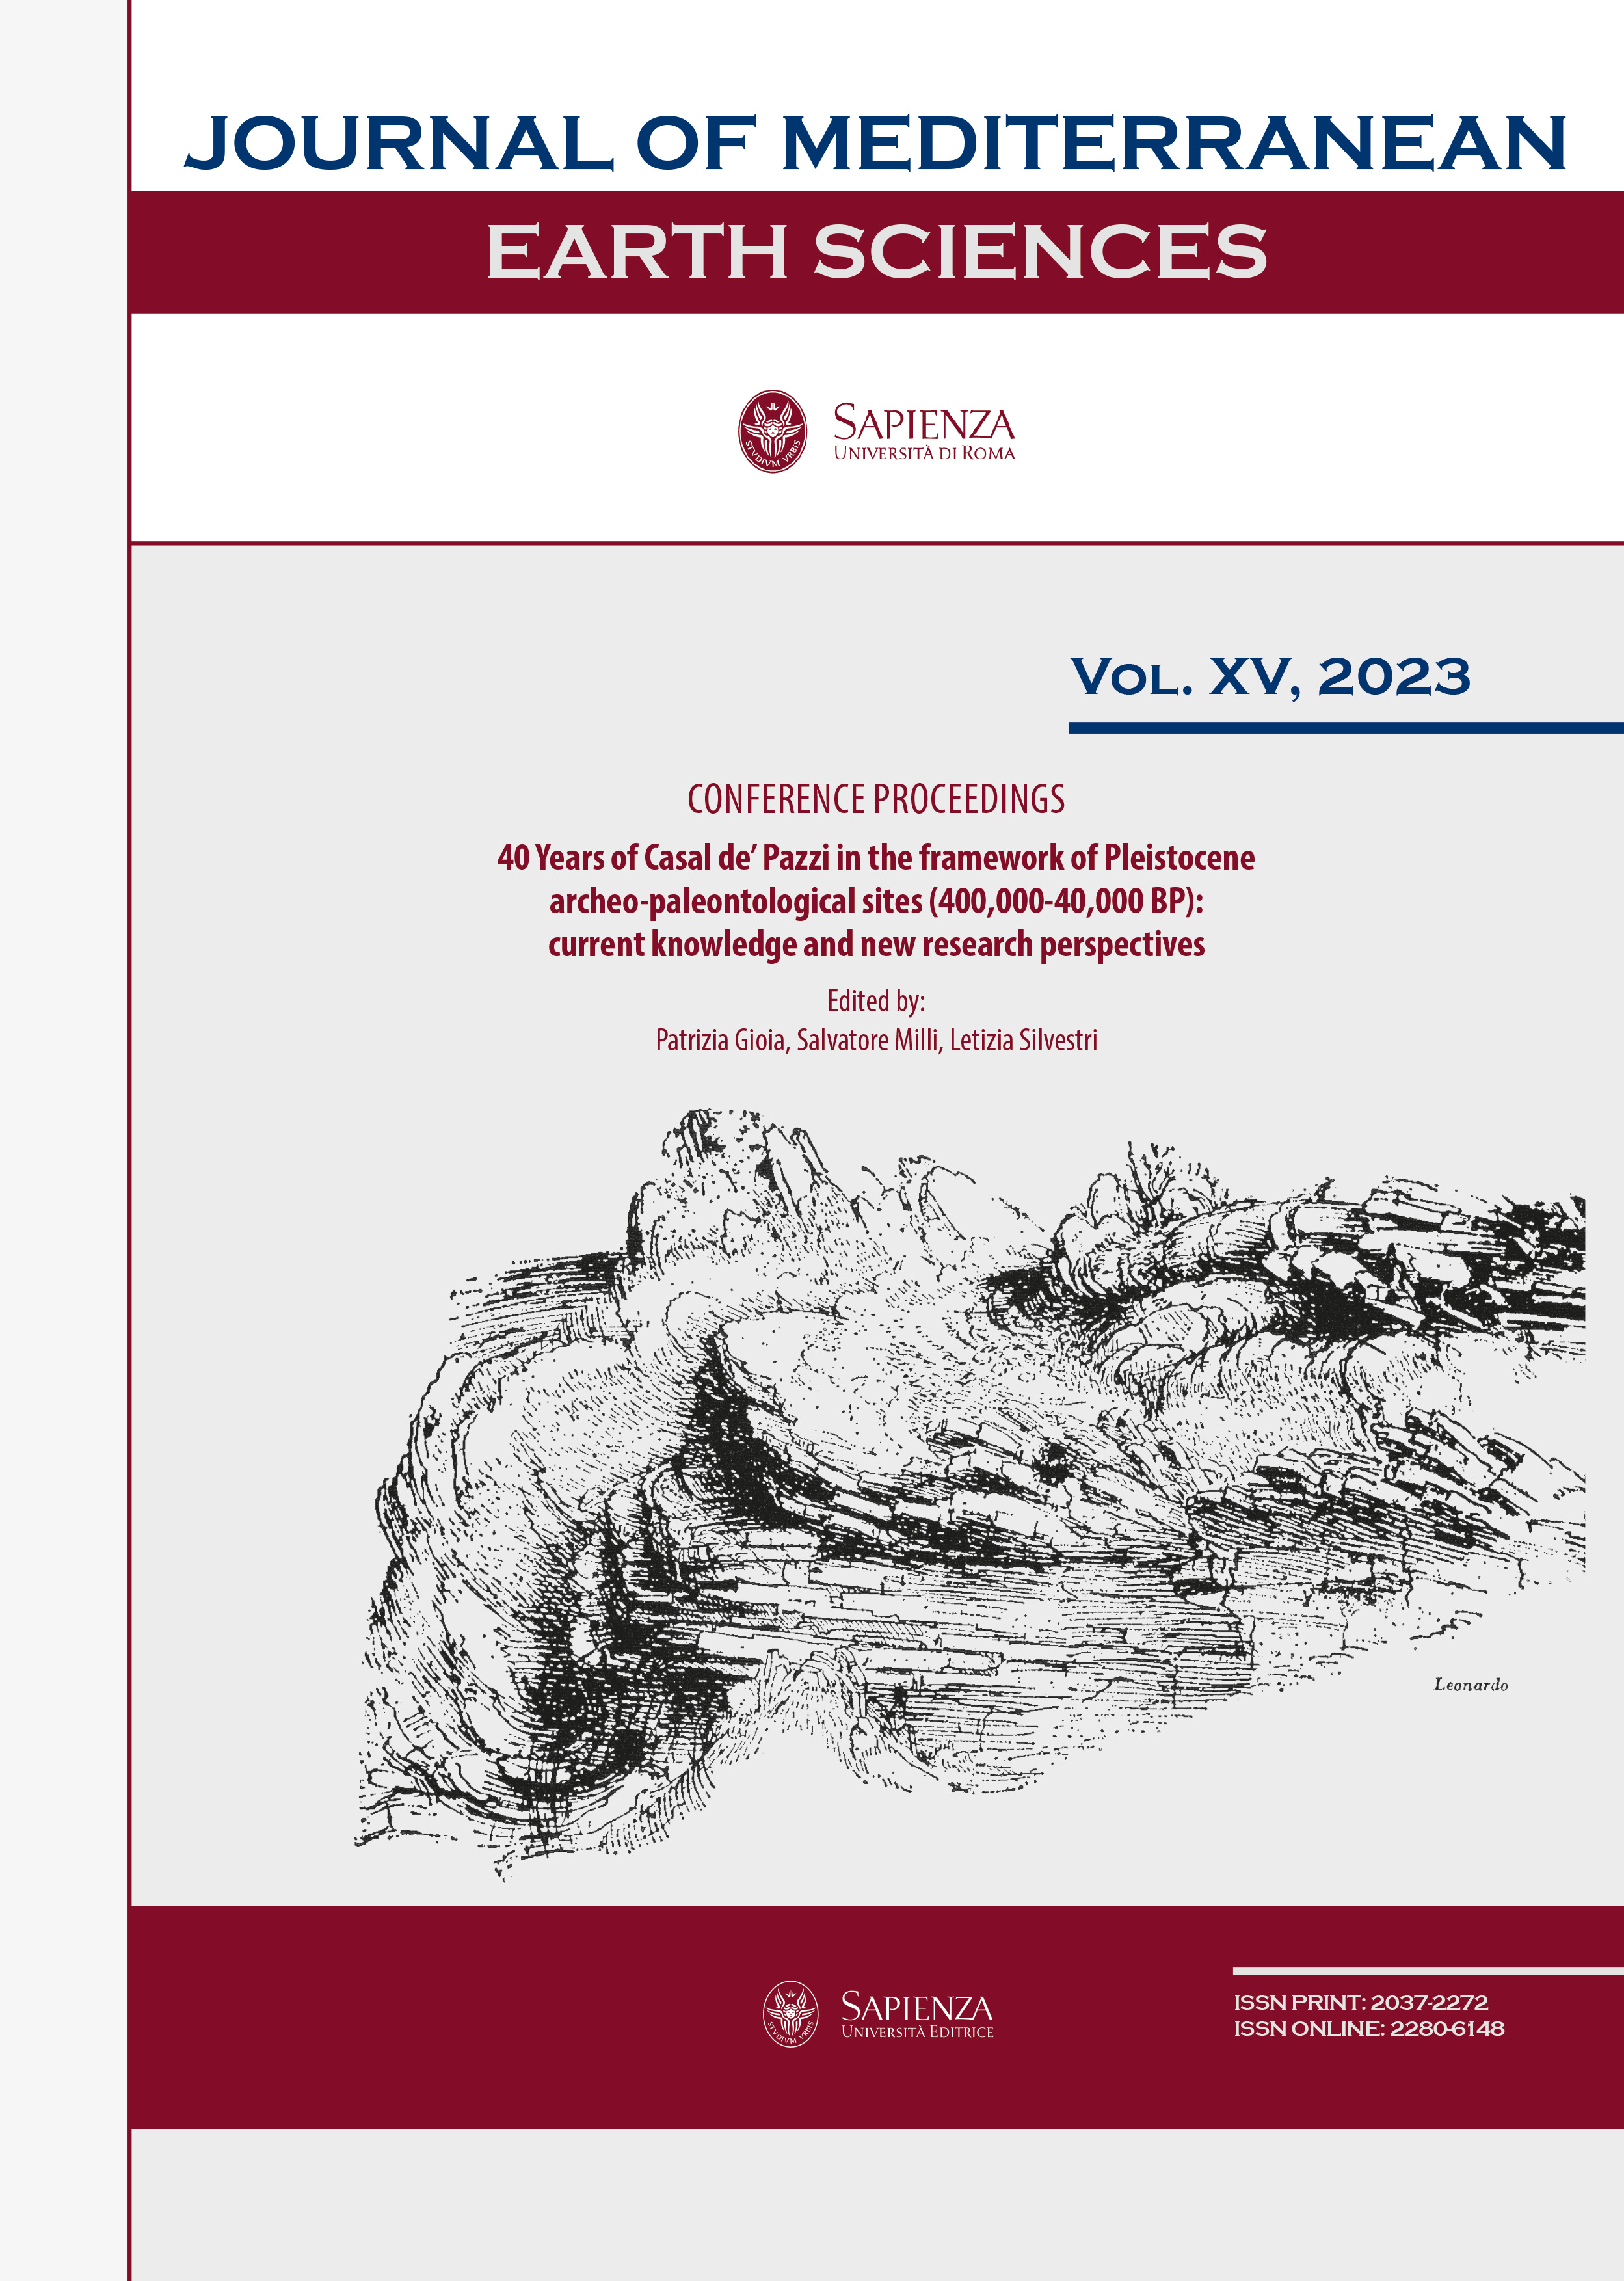 					View Vol. 15 (2023): Special Issue: "Conference Proceedings - 40 Years of Casal de’ Pazzi in the framework of Pleistocene archeo-paleontological sites (400,000-40,000 BP):  current knowledge and new research perspectives"
				